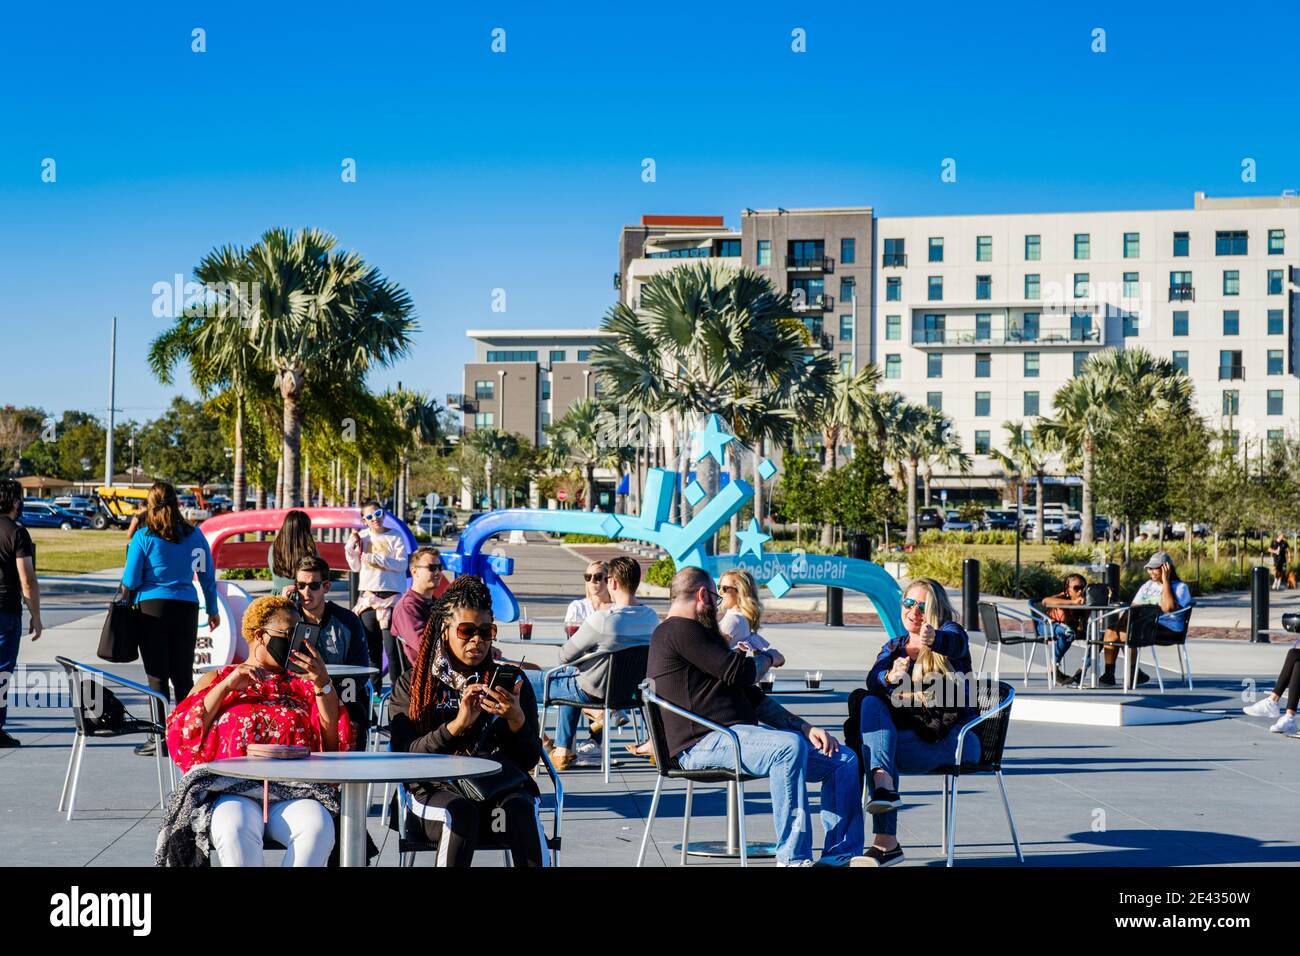 People engaging by the Tampa Riverwalk near Armature Works in Tampa Heights, Tampa, Florida. Tampa's first suburb established in 1883. The Tampa Heigh Stock Photo